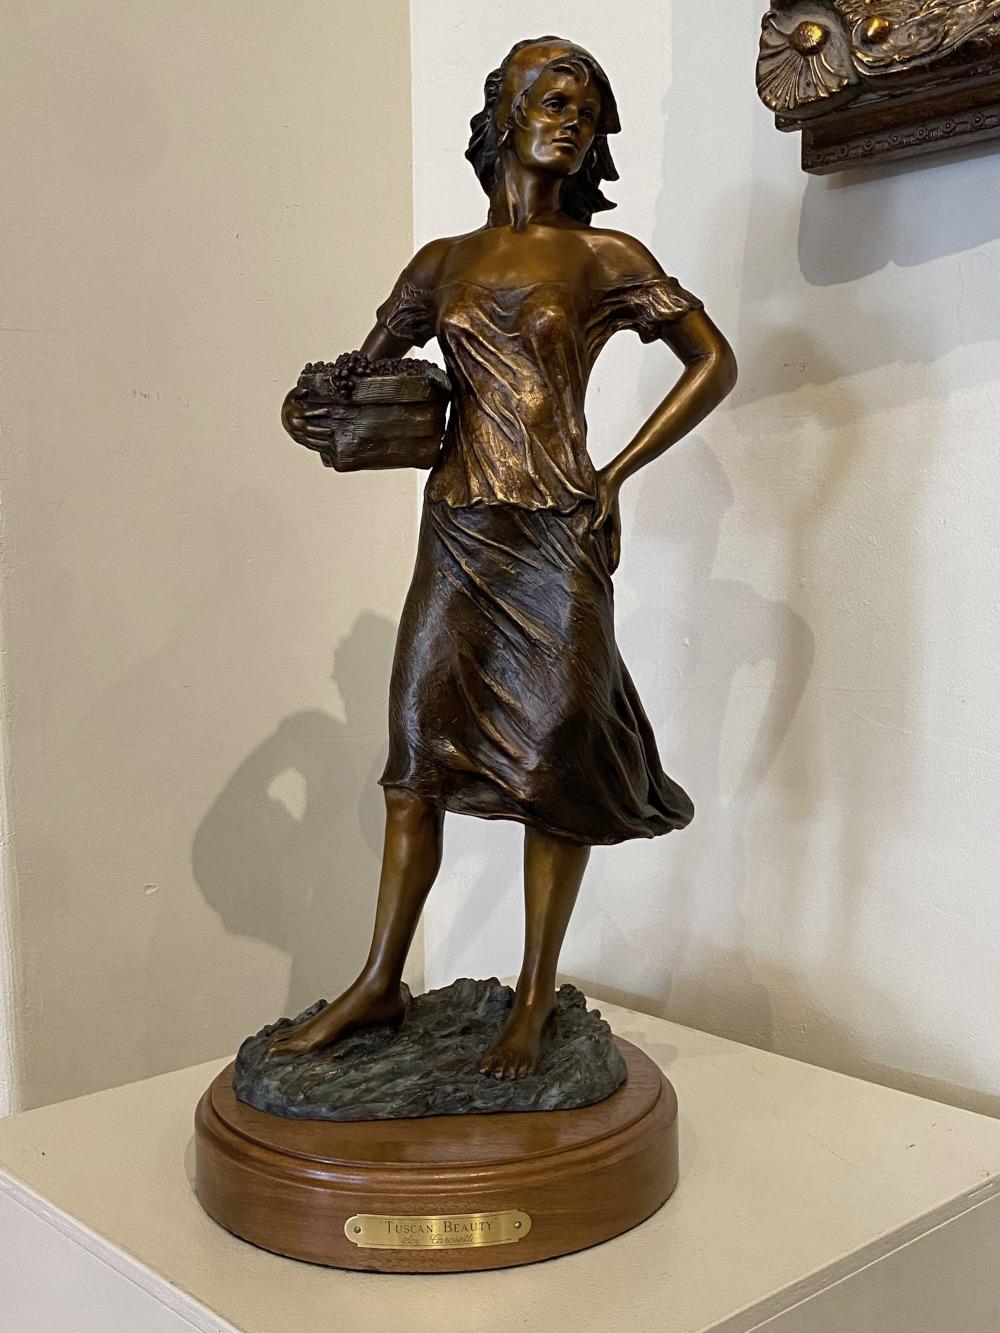 Scy Figurative Sculpture - "TUSCAN BEAUTY" FEMALE FIGURE WITH GRAPES WOMEN OF THE VINEYARD